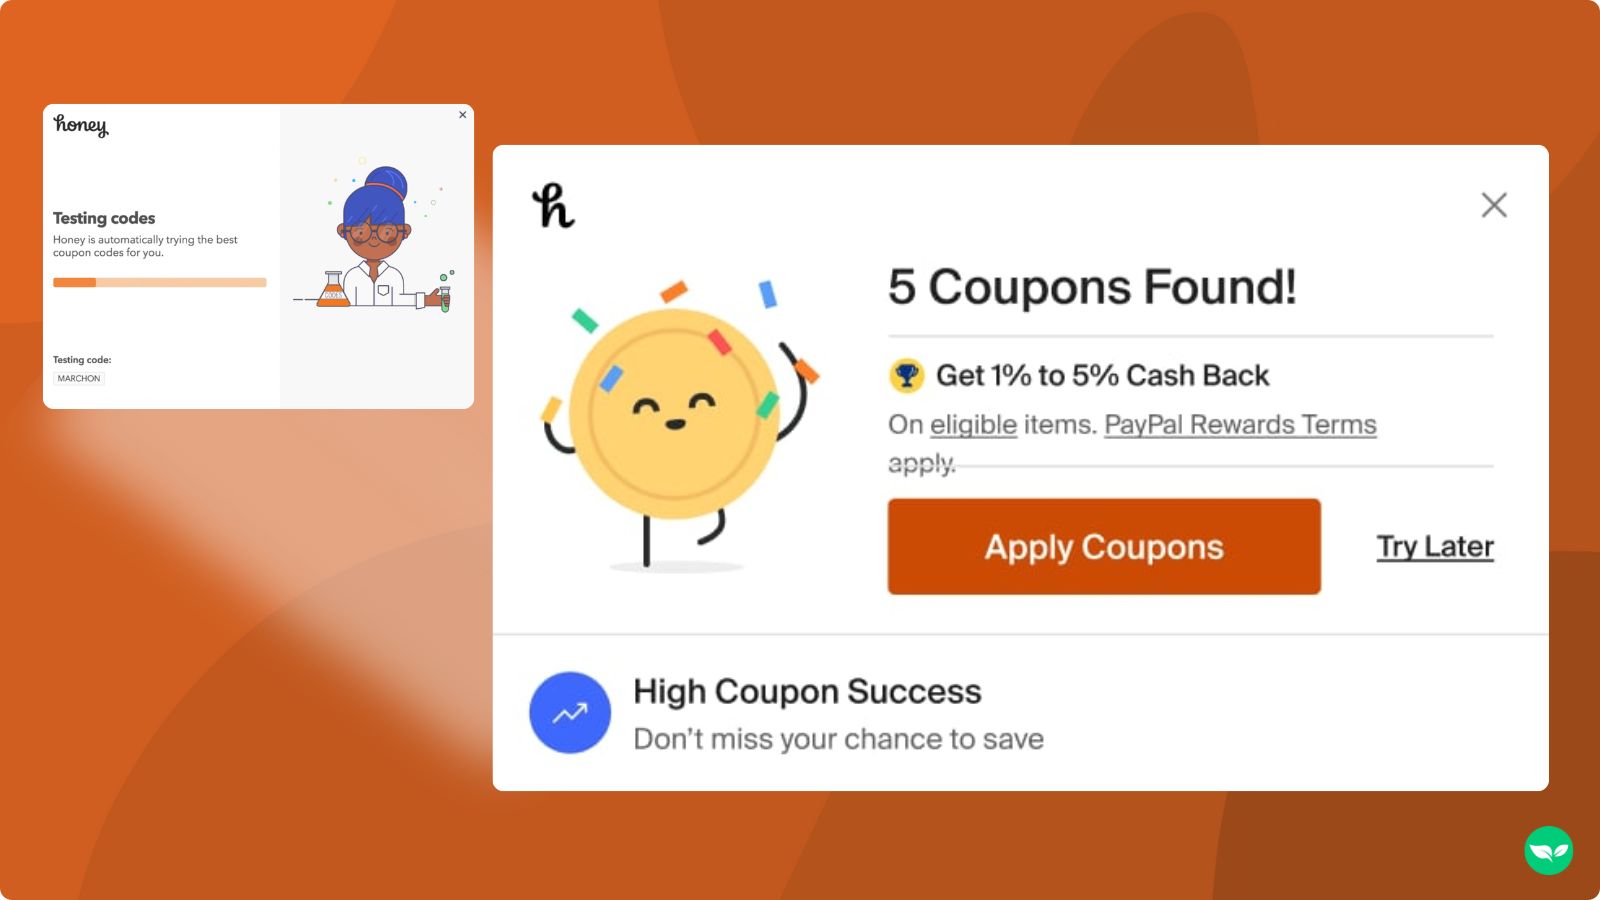 one of my favorite features of honey is its automatic coupon code application, the savings from which often exceed the additionally offered cash back rates